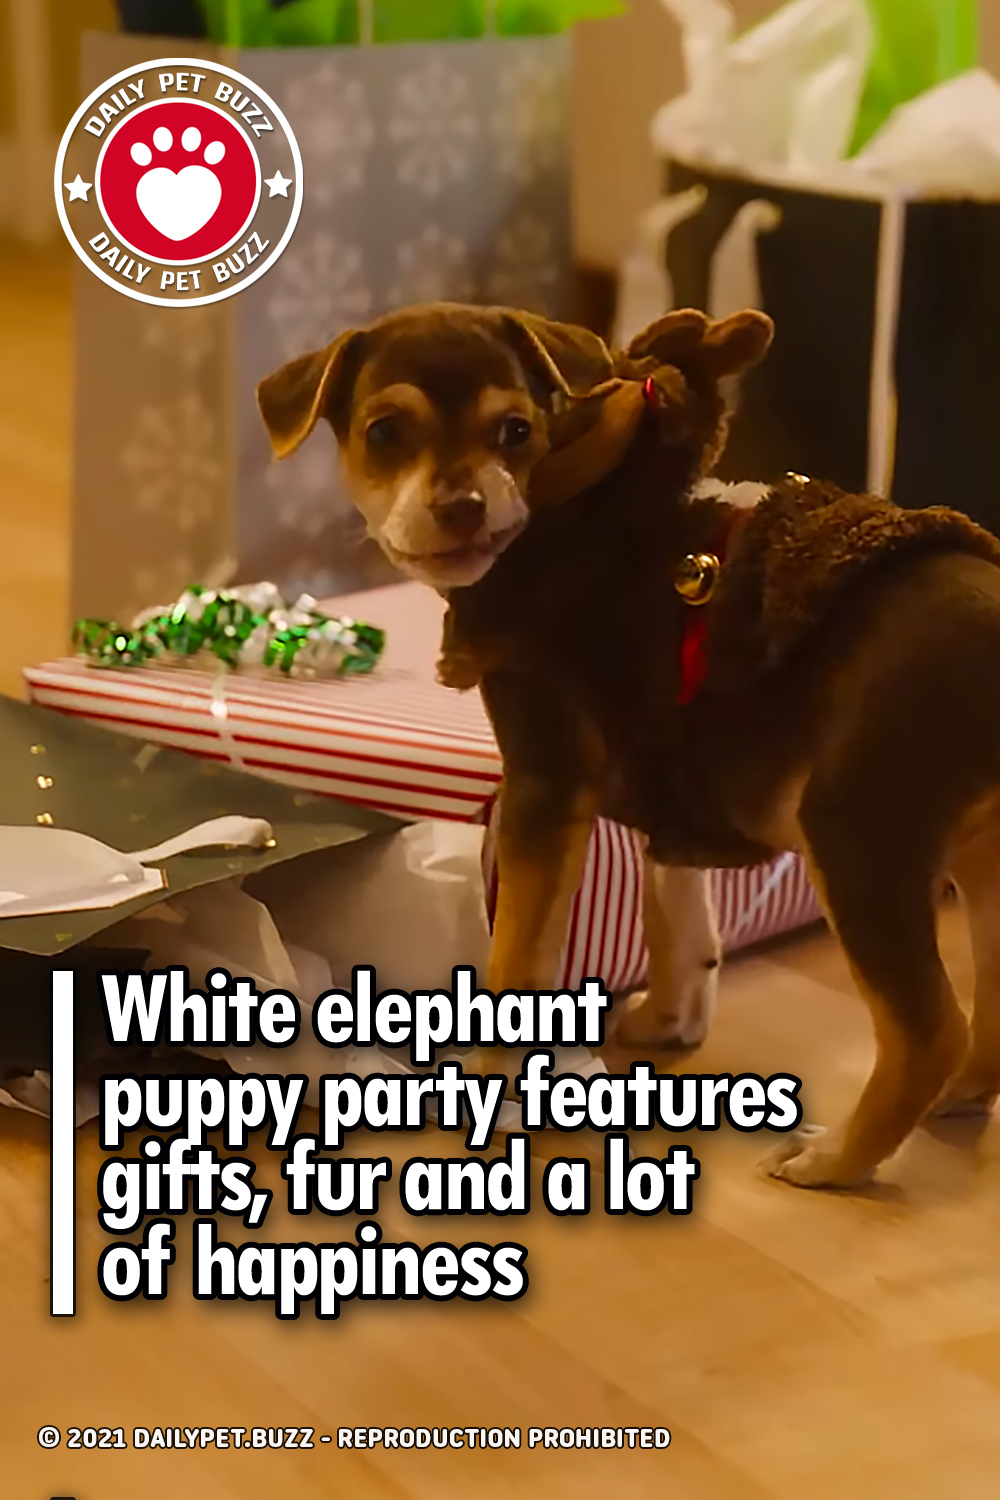 White elephant puppy party features gifts, fur and a lot of happiness